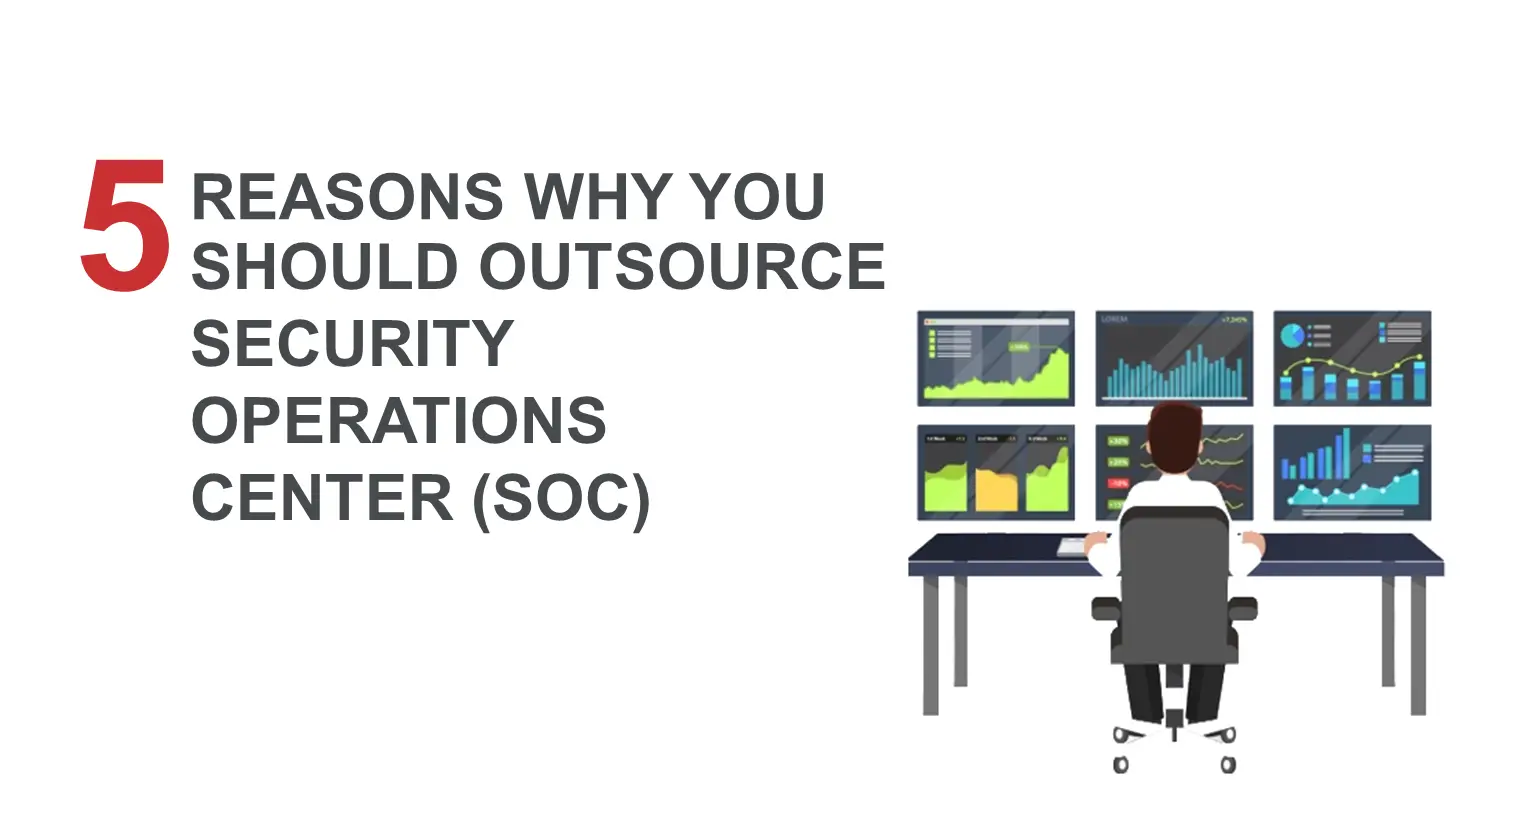 5 Reasons Why You Should Outsource Your Security Operations Center (SOC)